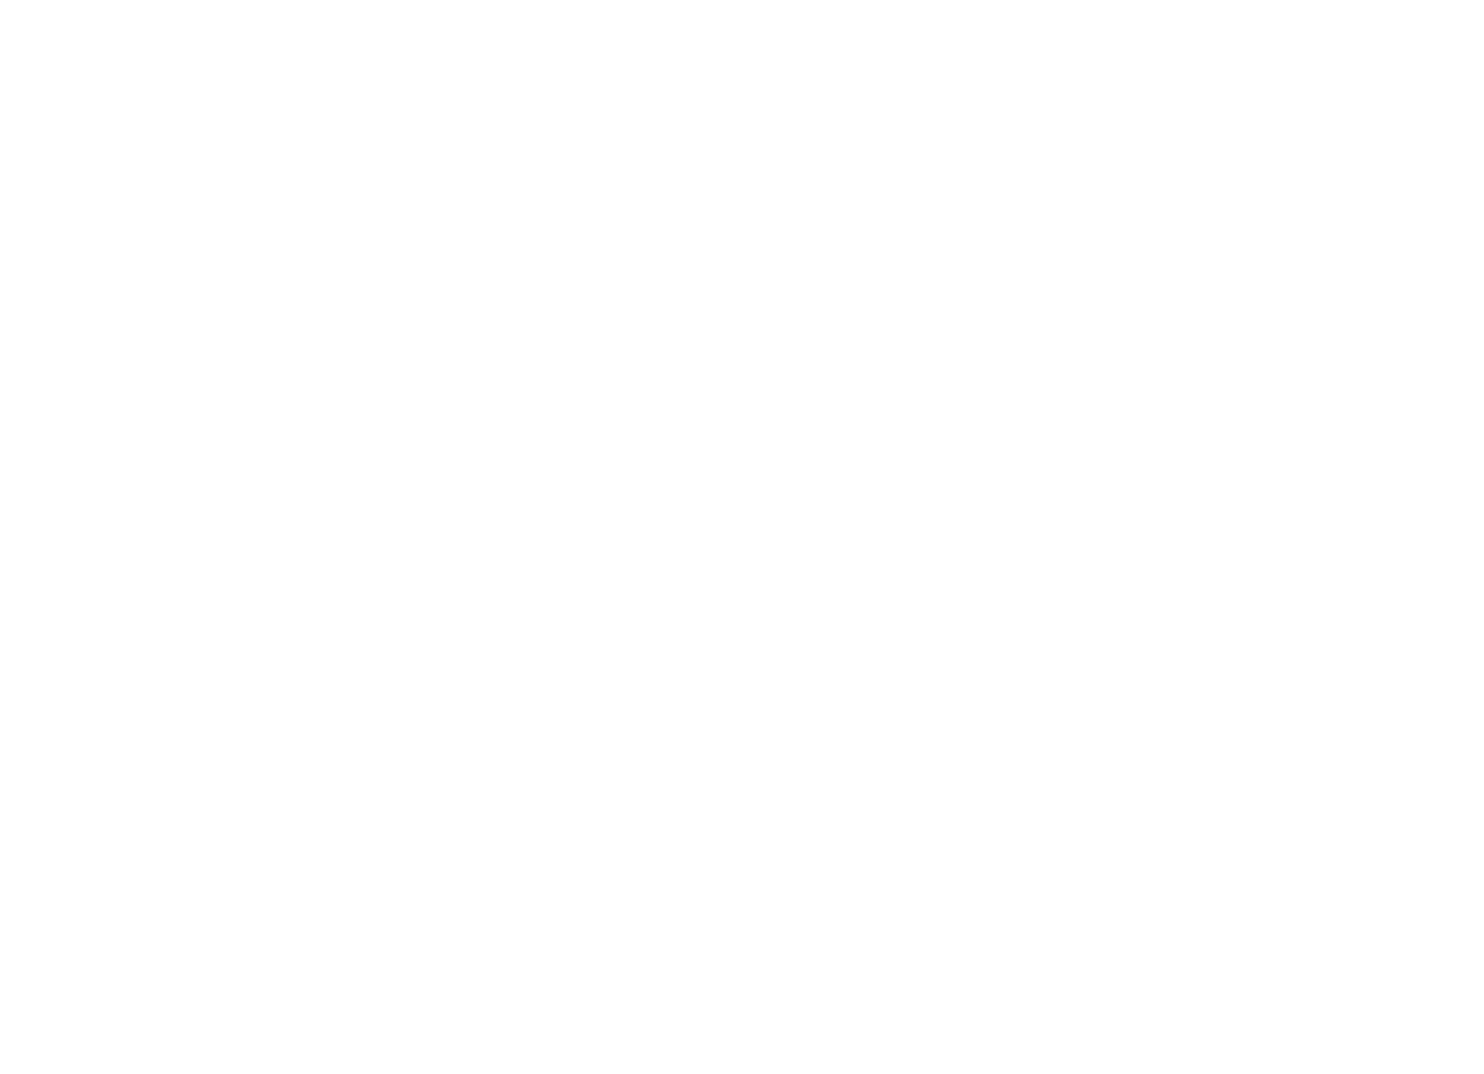 Soul of a Nation Presents: Screen Queens Rising logo